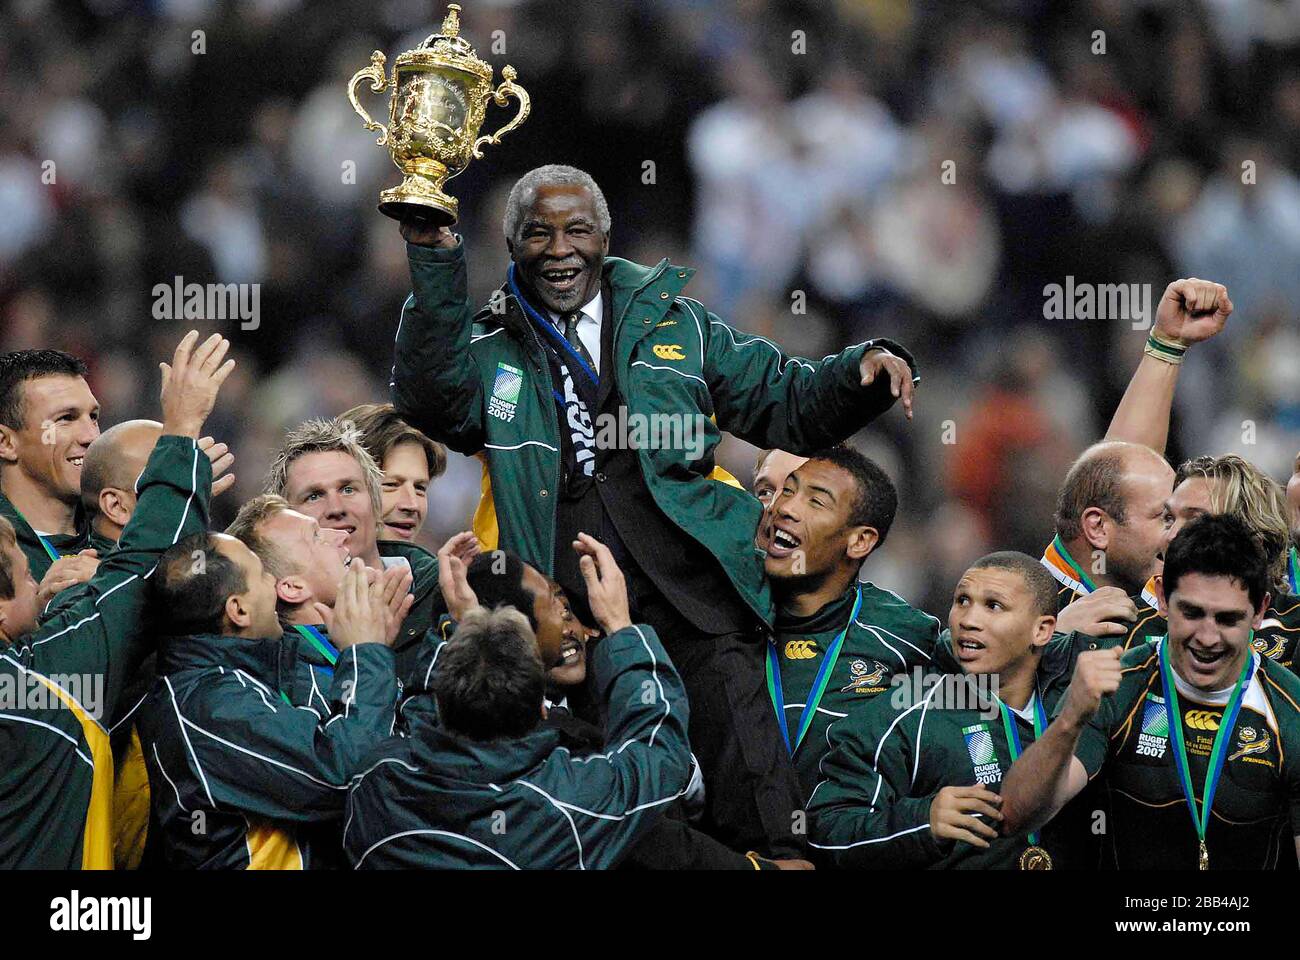 South African President Thabo Mvuyelwa Mbeki lifts the Rugby World Cup, as he himself is lifted by the team. England Vs South Africa. Rugby World Cup Stock Photo